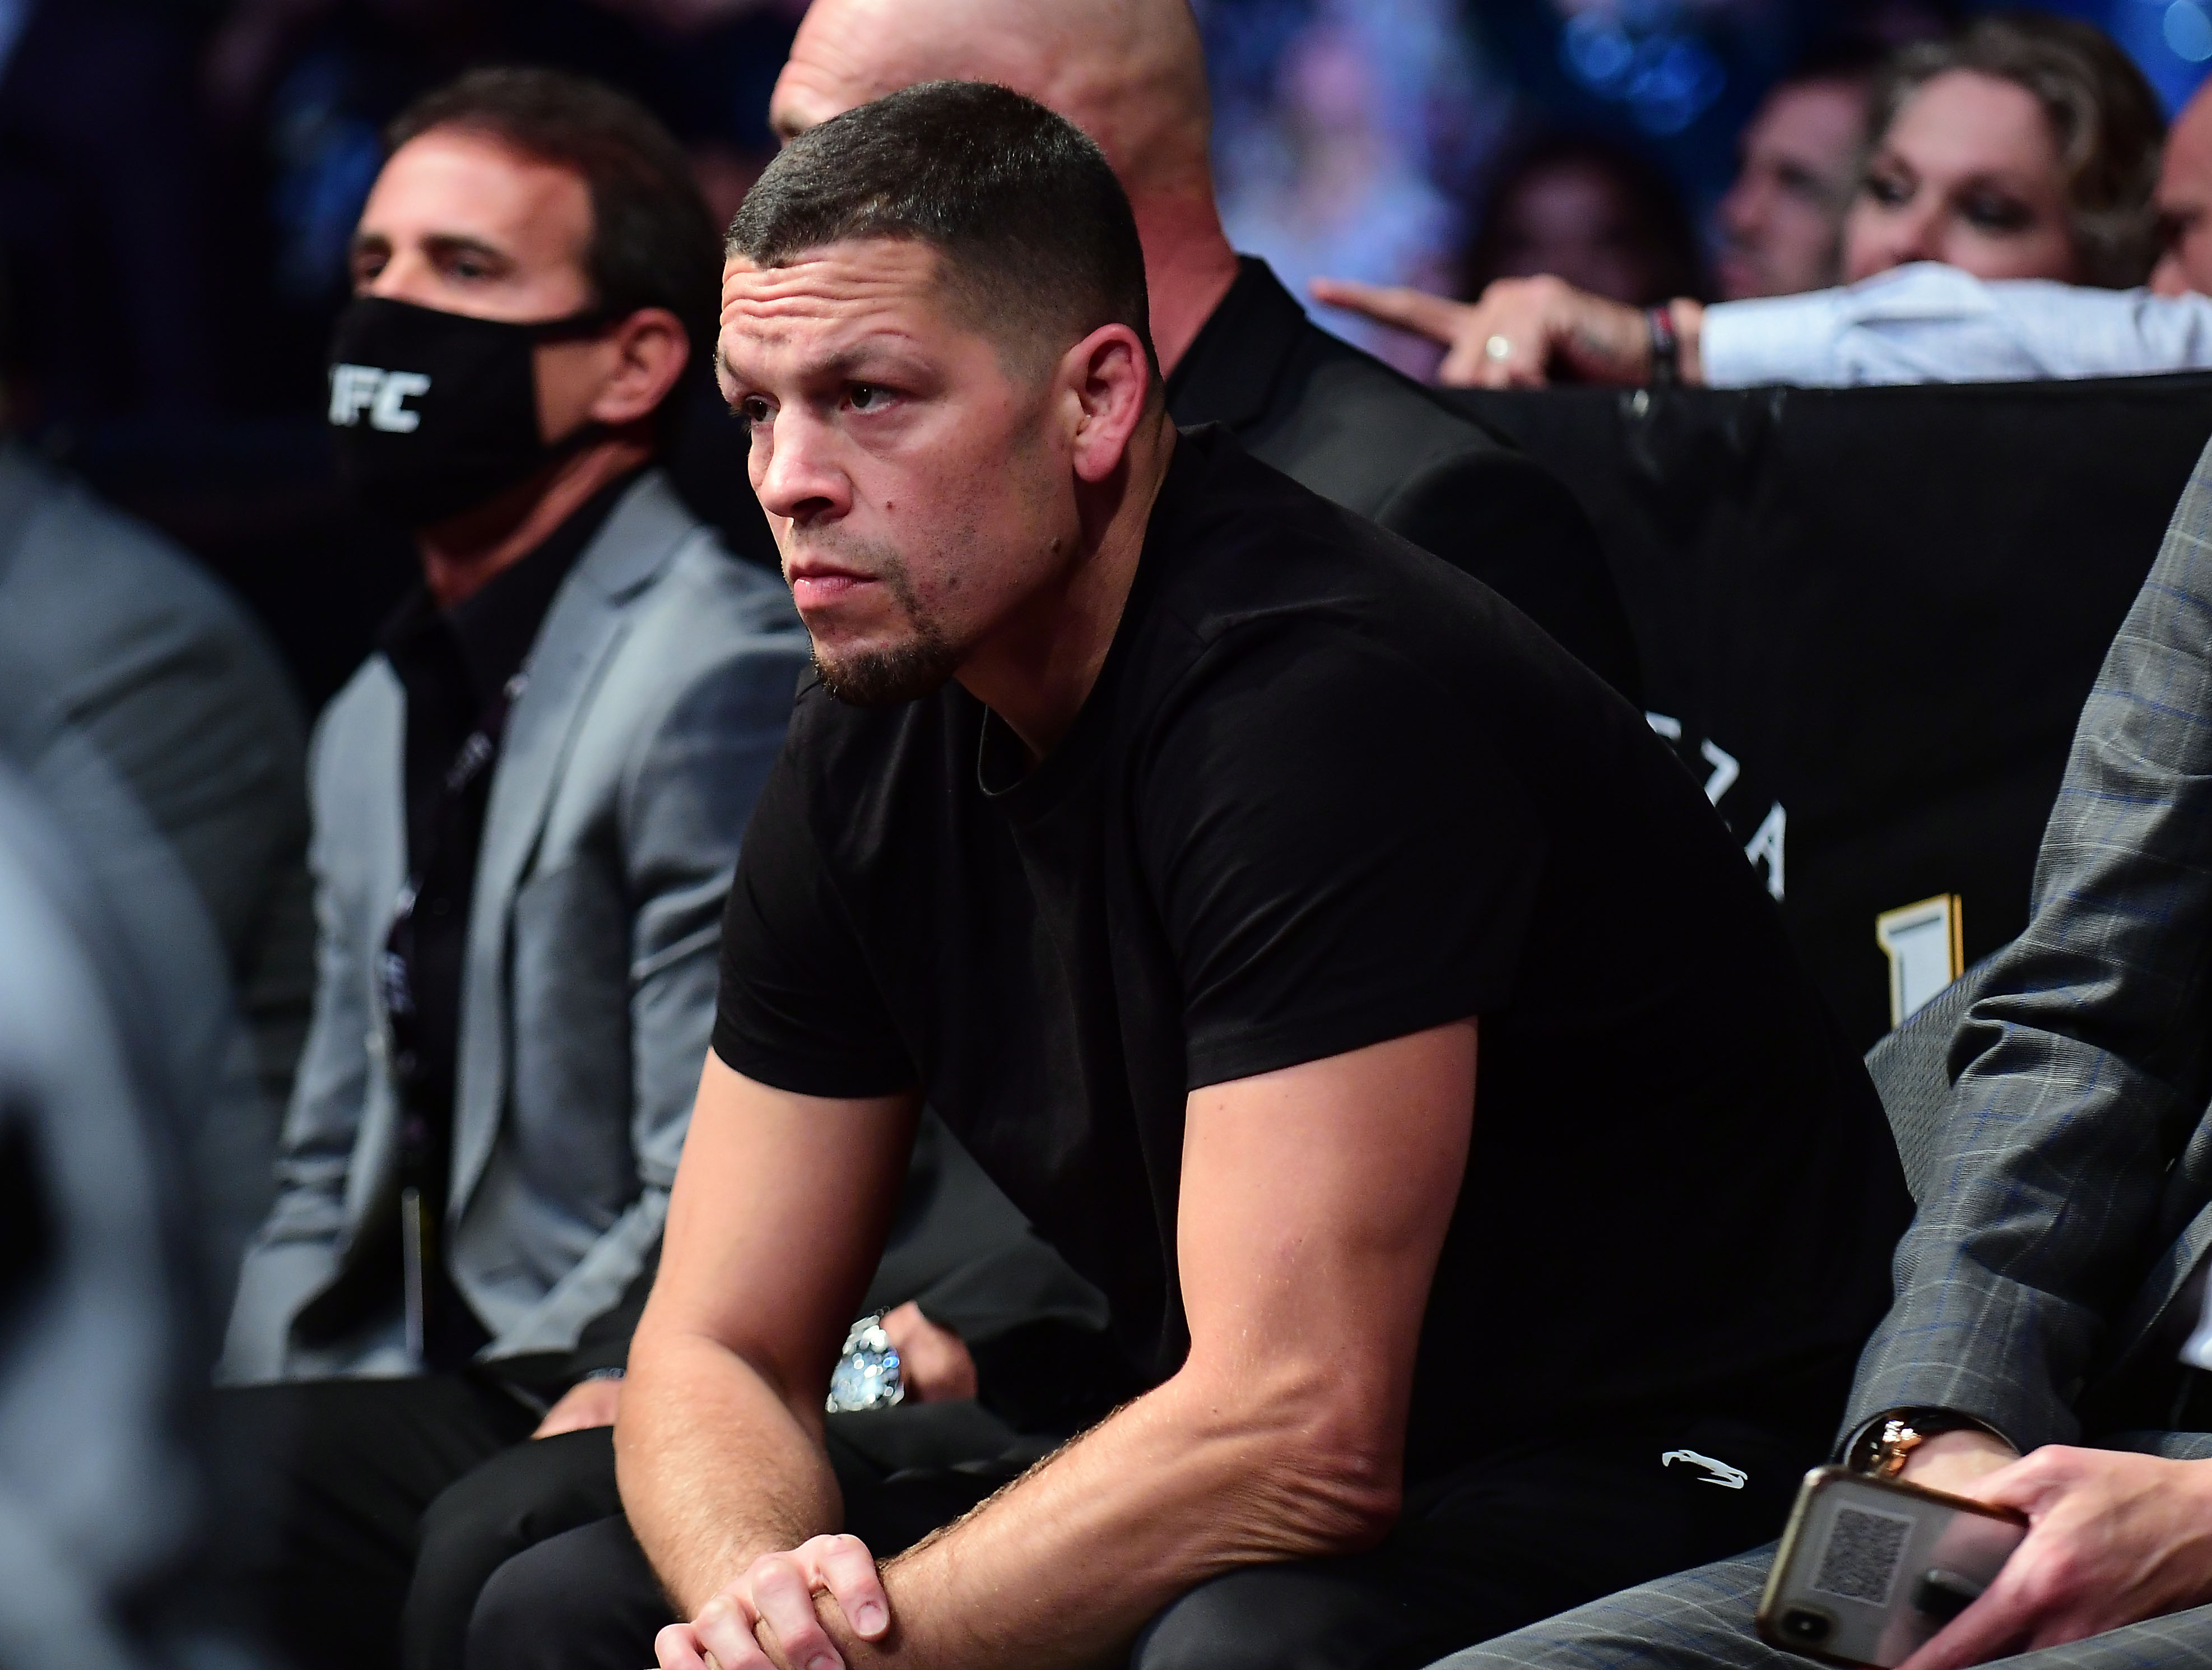 Nate Diaz Announces Intentions to Promote Combat Sports Events With Real Fight, Inc.